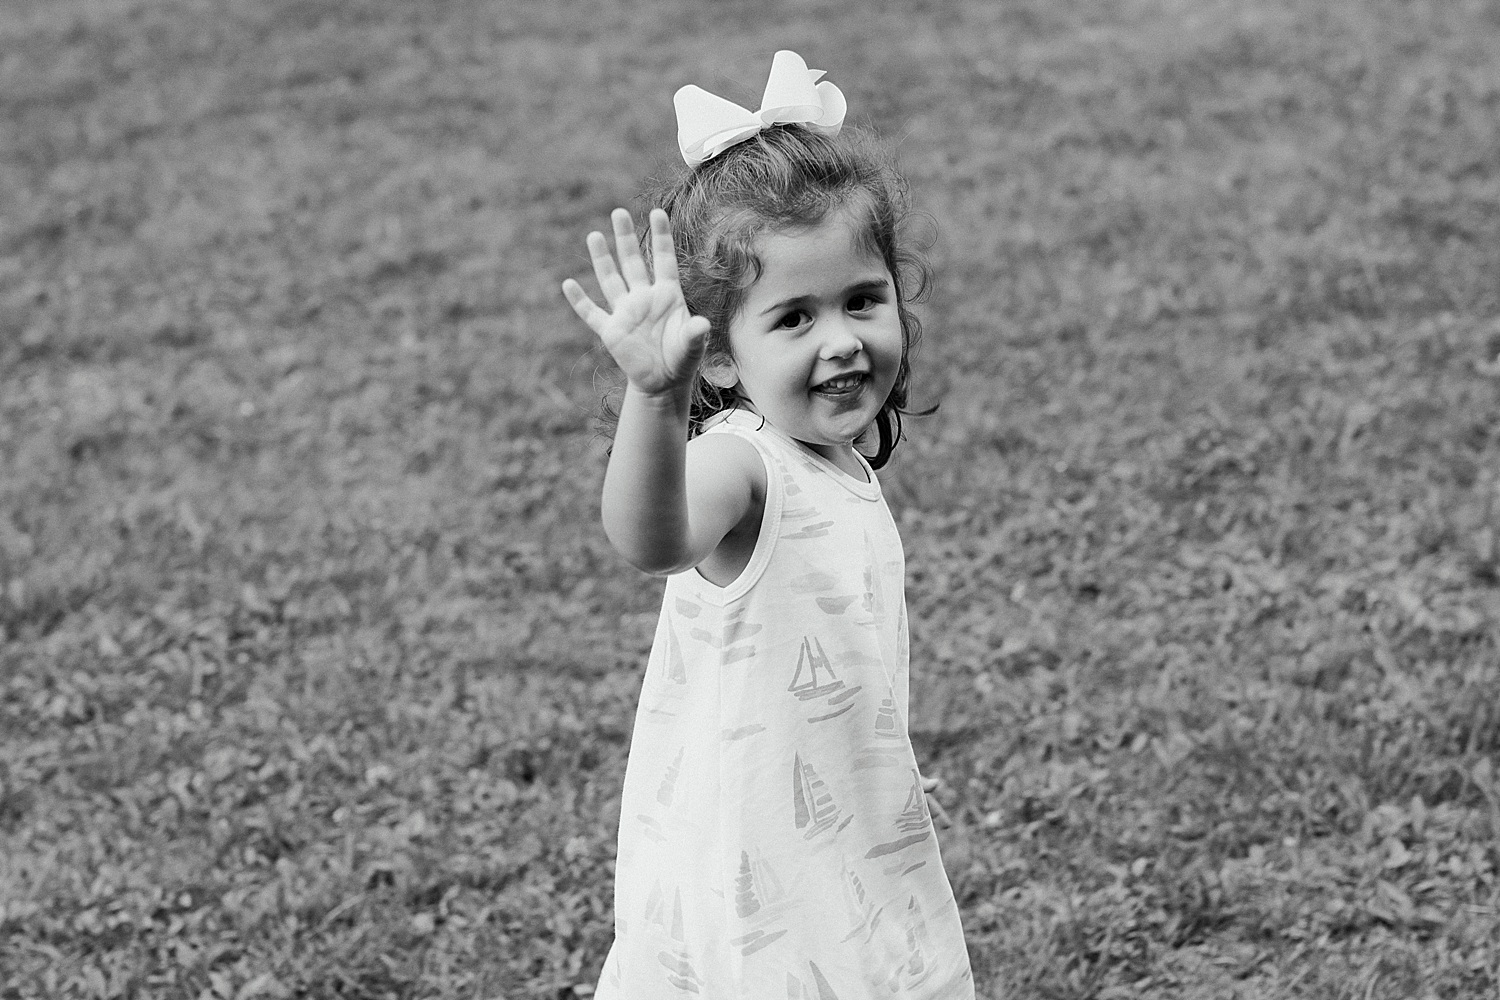 little girl waving at the camera at the end of portrait session in Sargentville, Maine